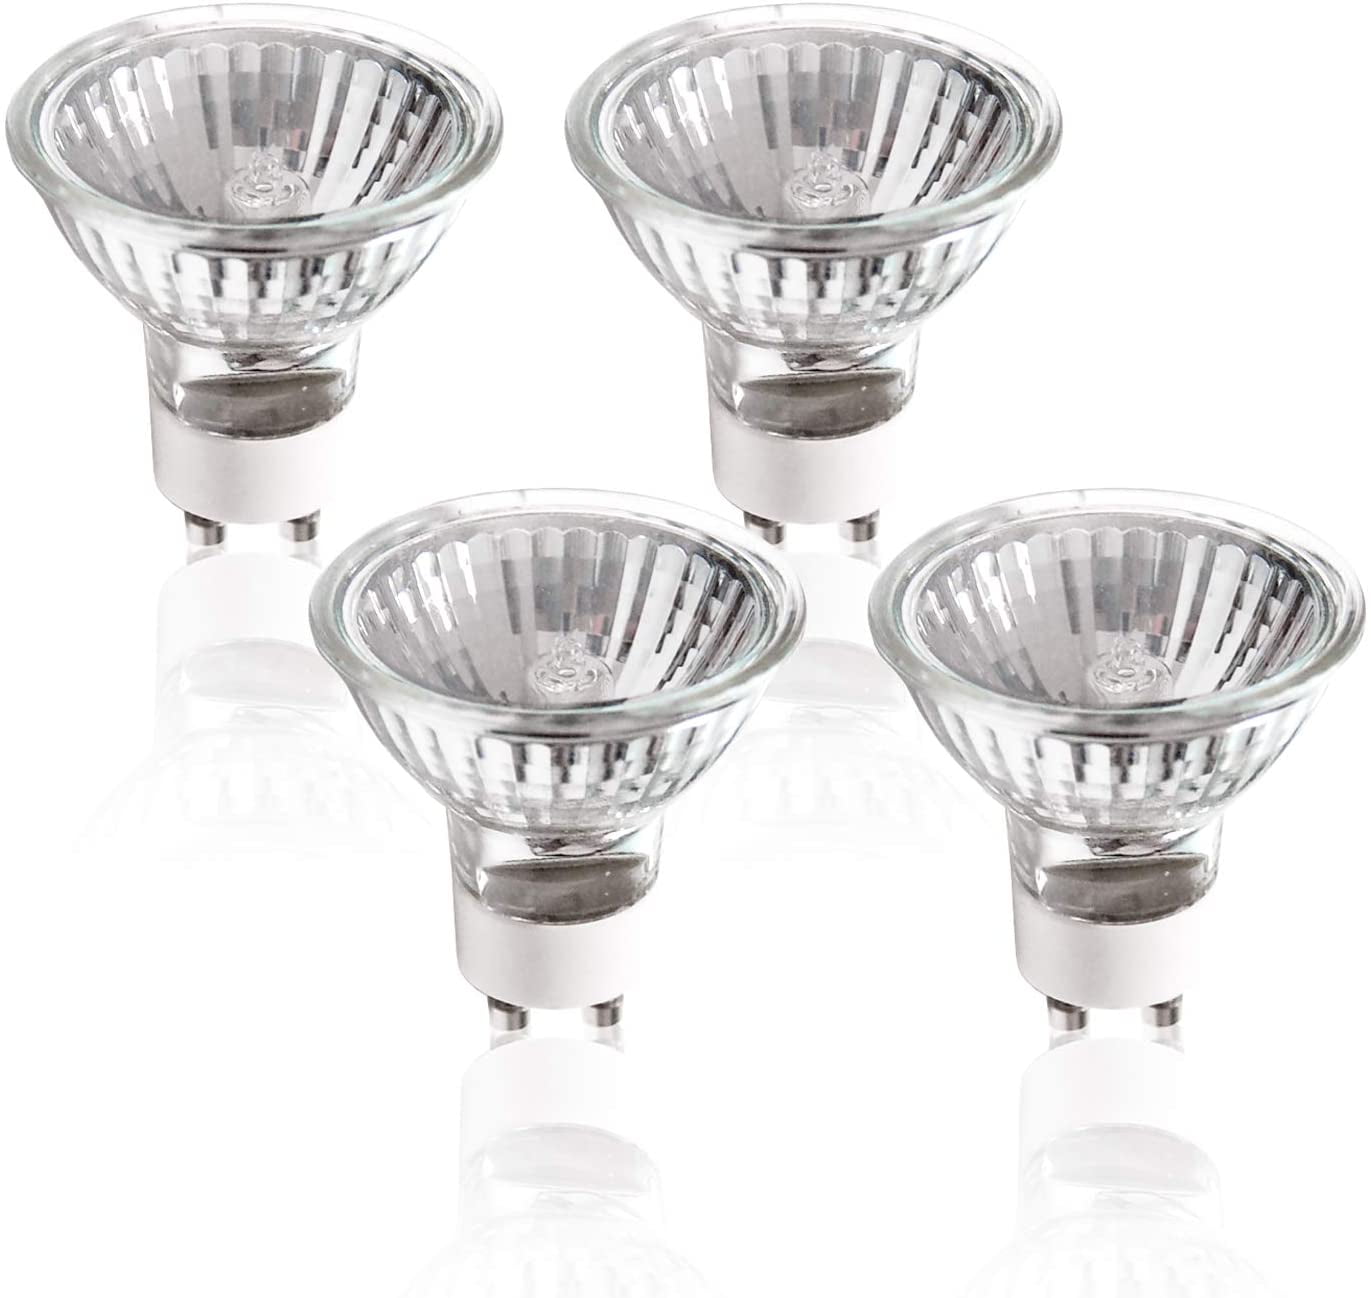 ETOPLIGHTING 4 Pack 50W GU10 Halogen Compact Size High Efficiency Flood Light Bulb 50 Watts 120V, Bright Output Soft White, Glass Cover & Dimmable, Warm White for Indoor and Outdoor, APL2185